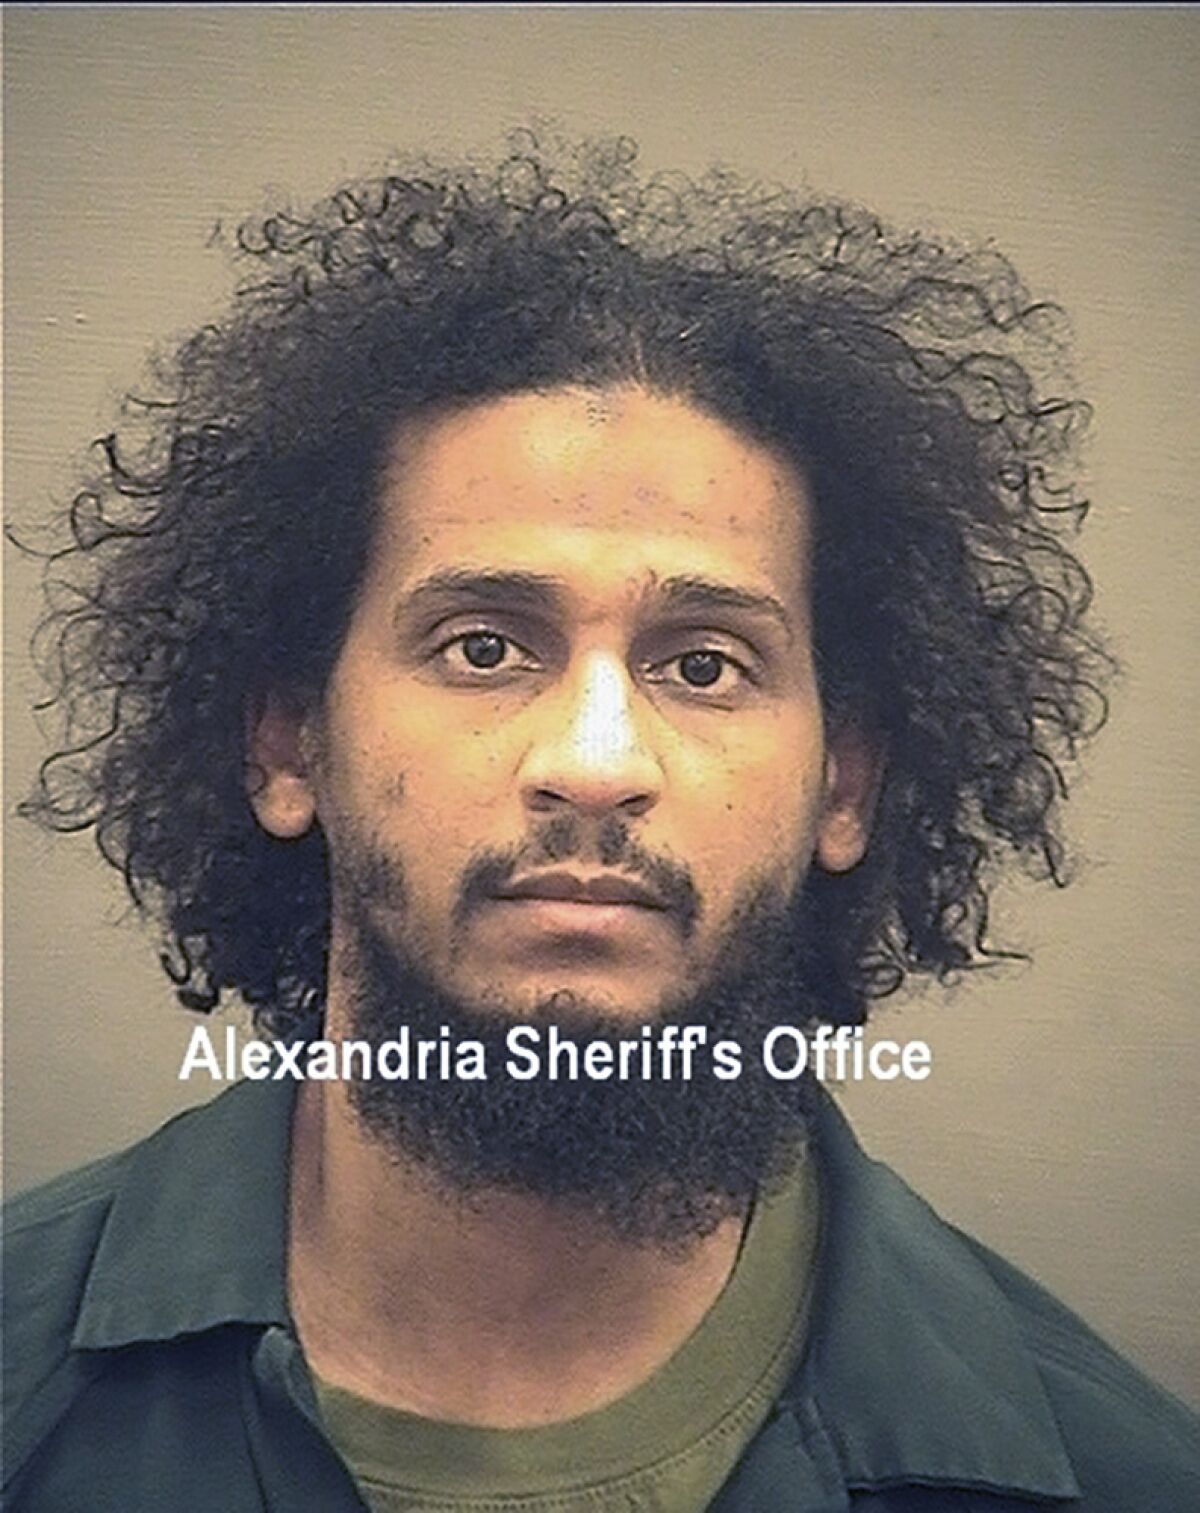 FILE - In this photo provided by the Alexandria Sheriff's Office is El Shafee Elsheikh who is in custody at the Alexandria Adult Detention Center, Wednesday, Oct. 7, 2020, in Alexandria, Va. Defense lawyers for the British national facing trial later this month for helping the Islamic State group torture and behead American hostages are seeking to block testimony from a Kurdish girl held as a slave by the group. The girl, identified only as Jane Doe in court documents, was abducted at age 15 from Kurdistan in August 2014 and held by the Islamic State.(Alexandria Sheriff's Office via AP)